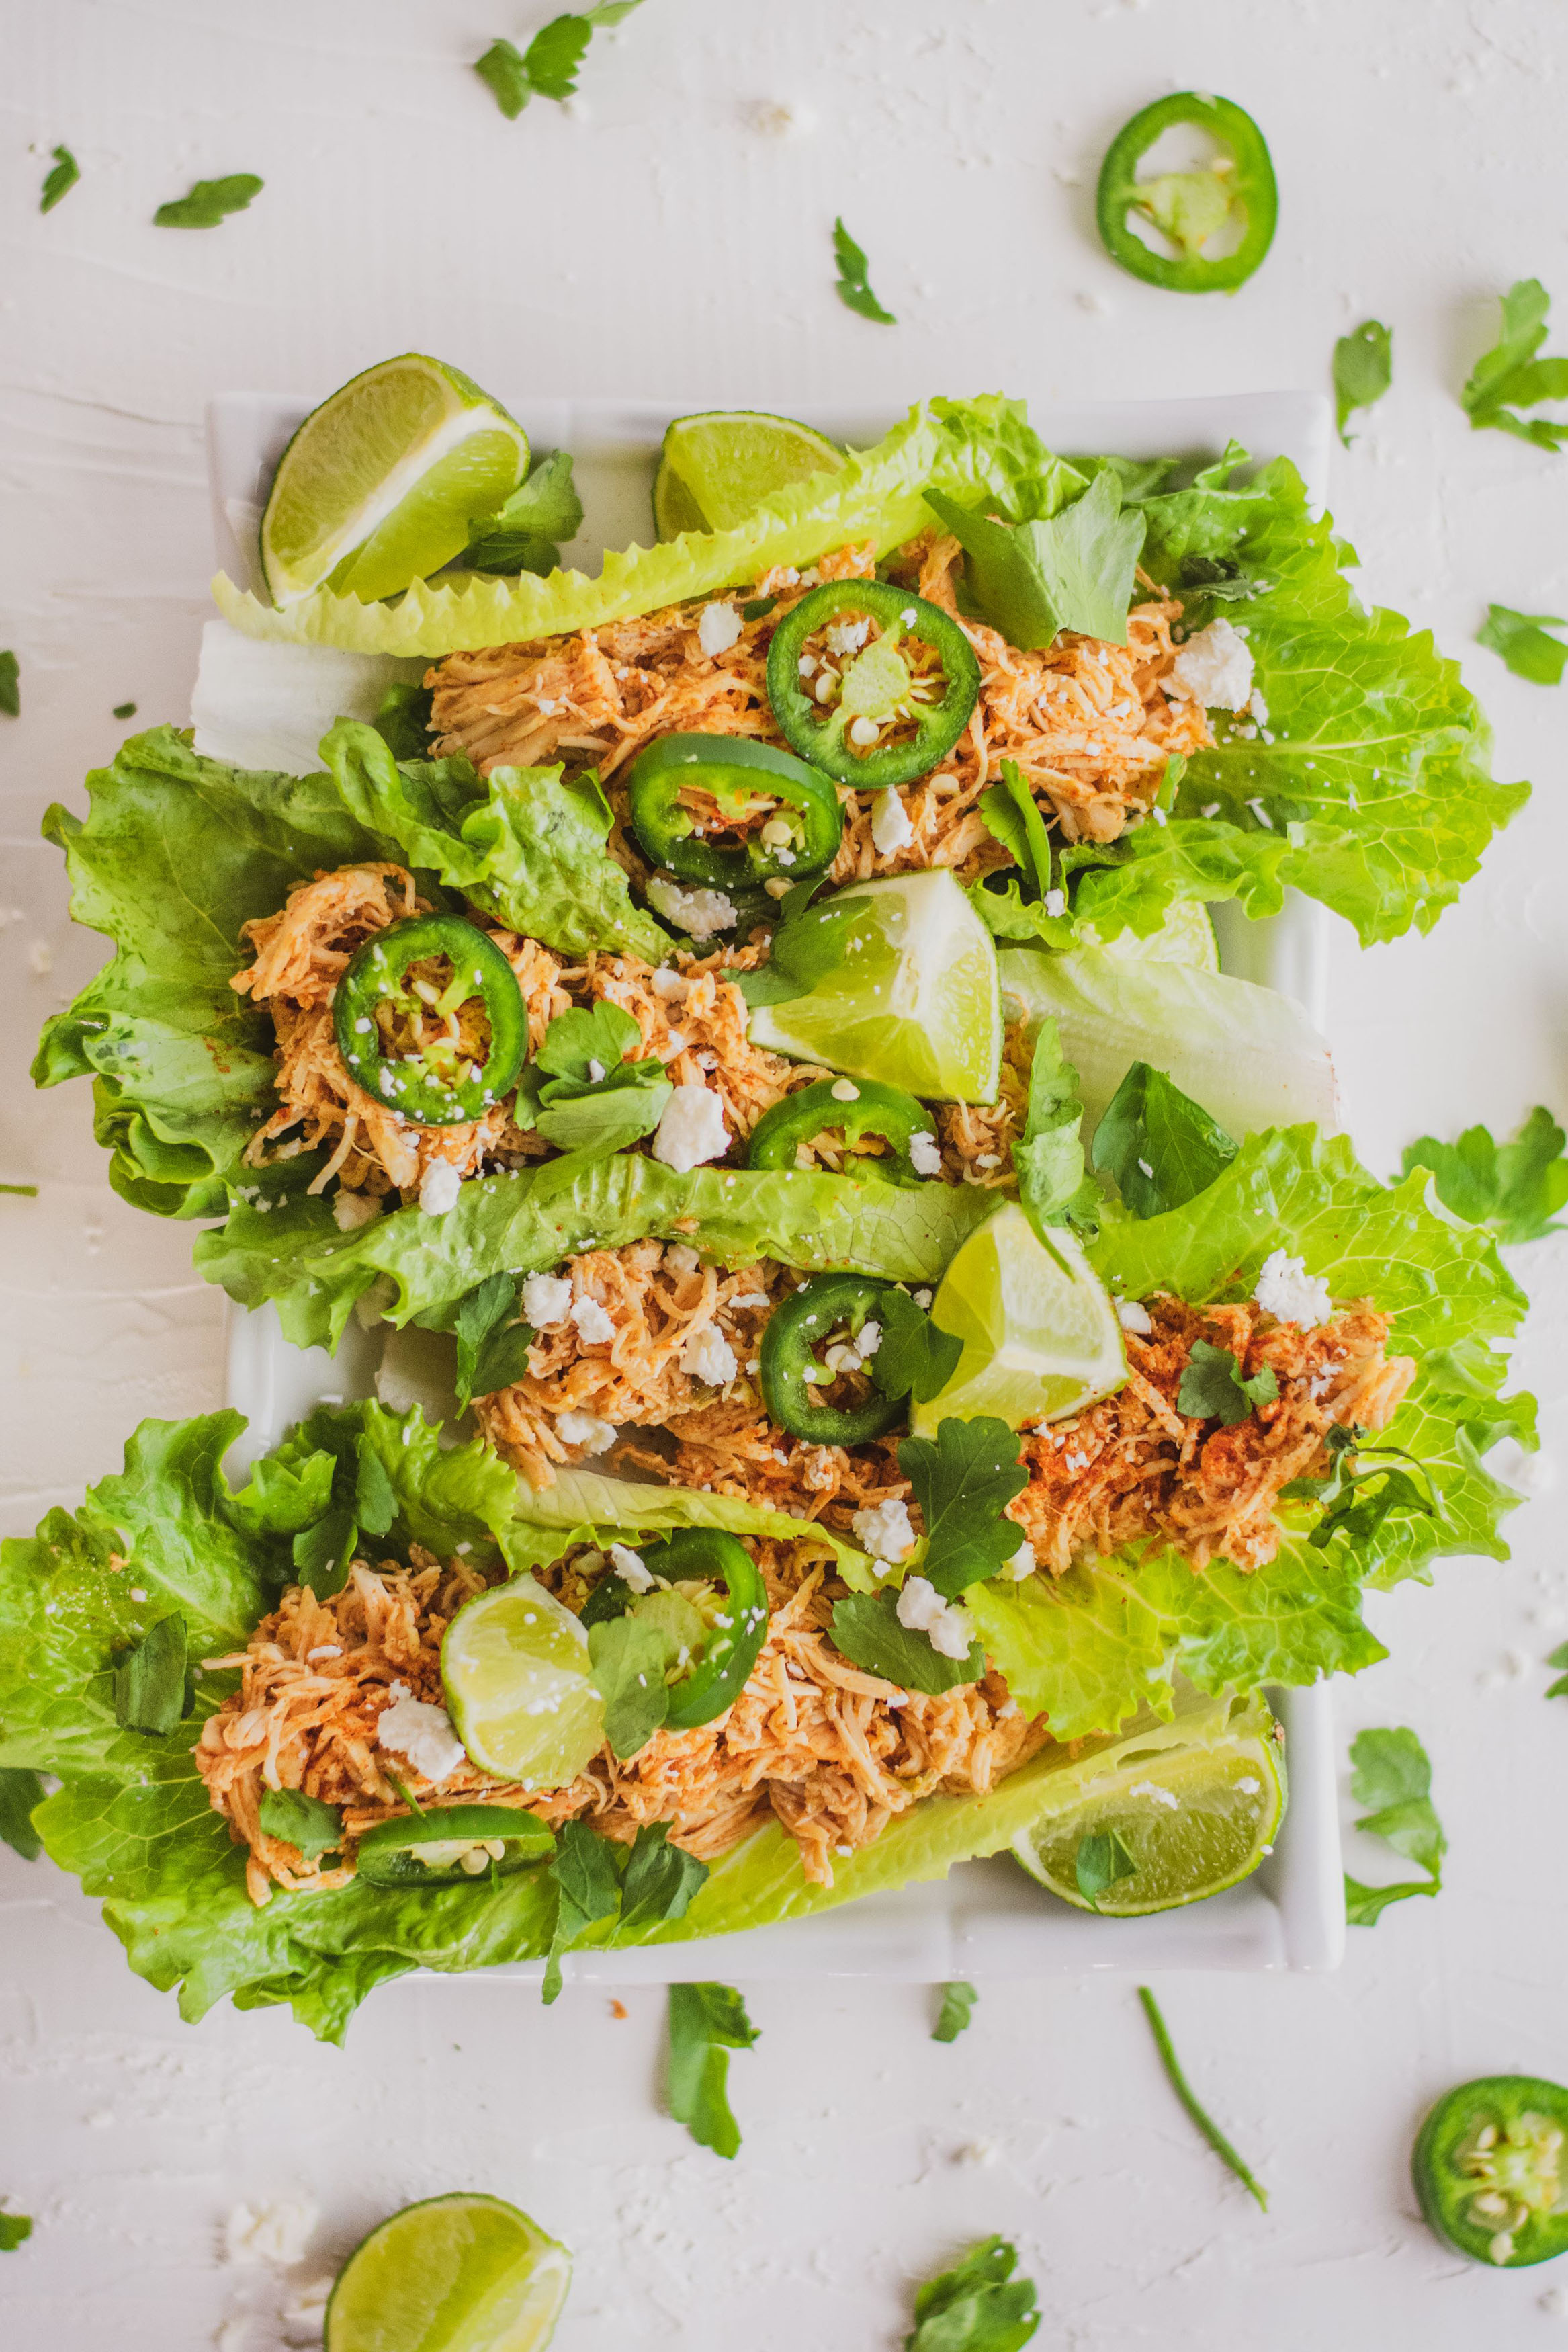 Shredded chicken tacos in lettuce wraps with fetta cheese, limes and jalapenos on top